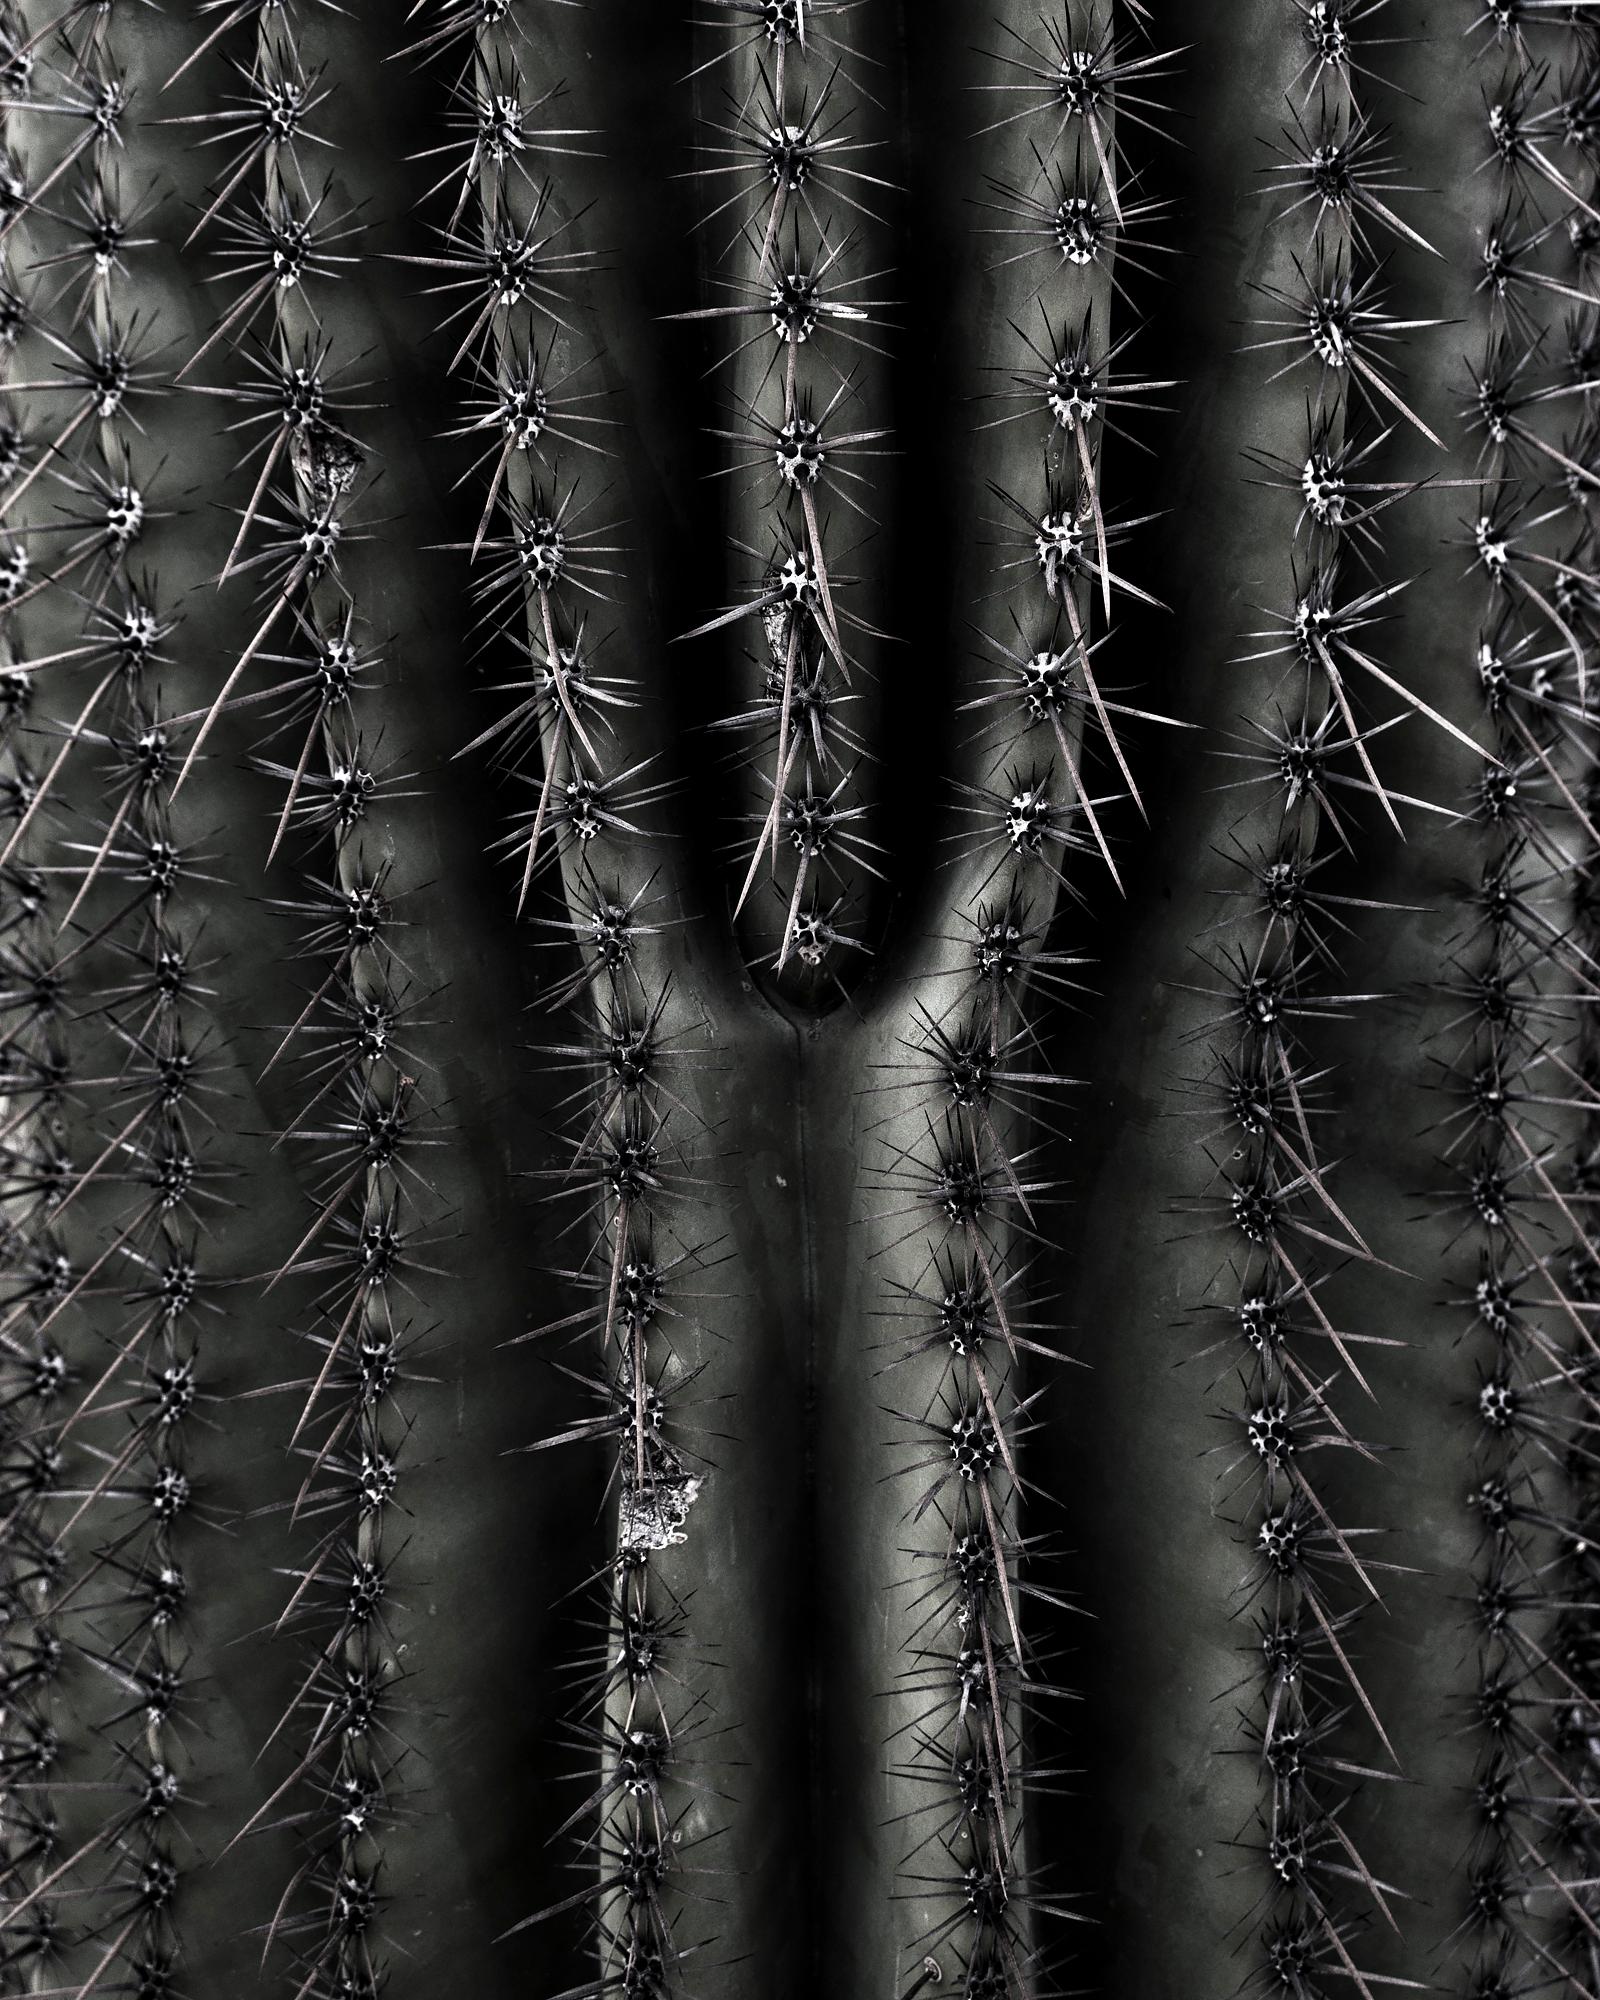 Limited Edition Prints from Desert Bellows, A Saguaro Series by Andrew Johnson 3